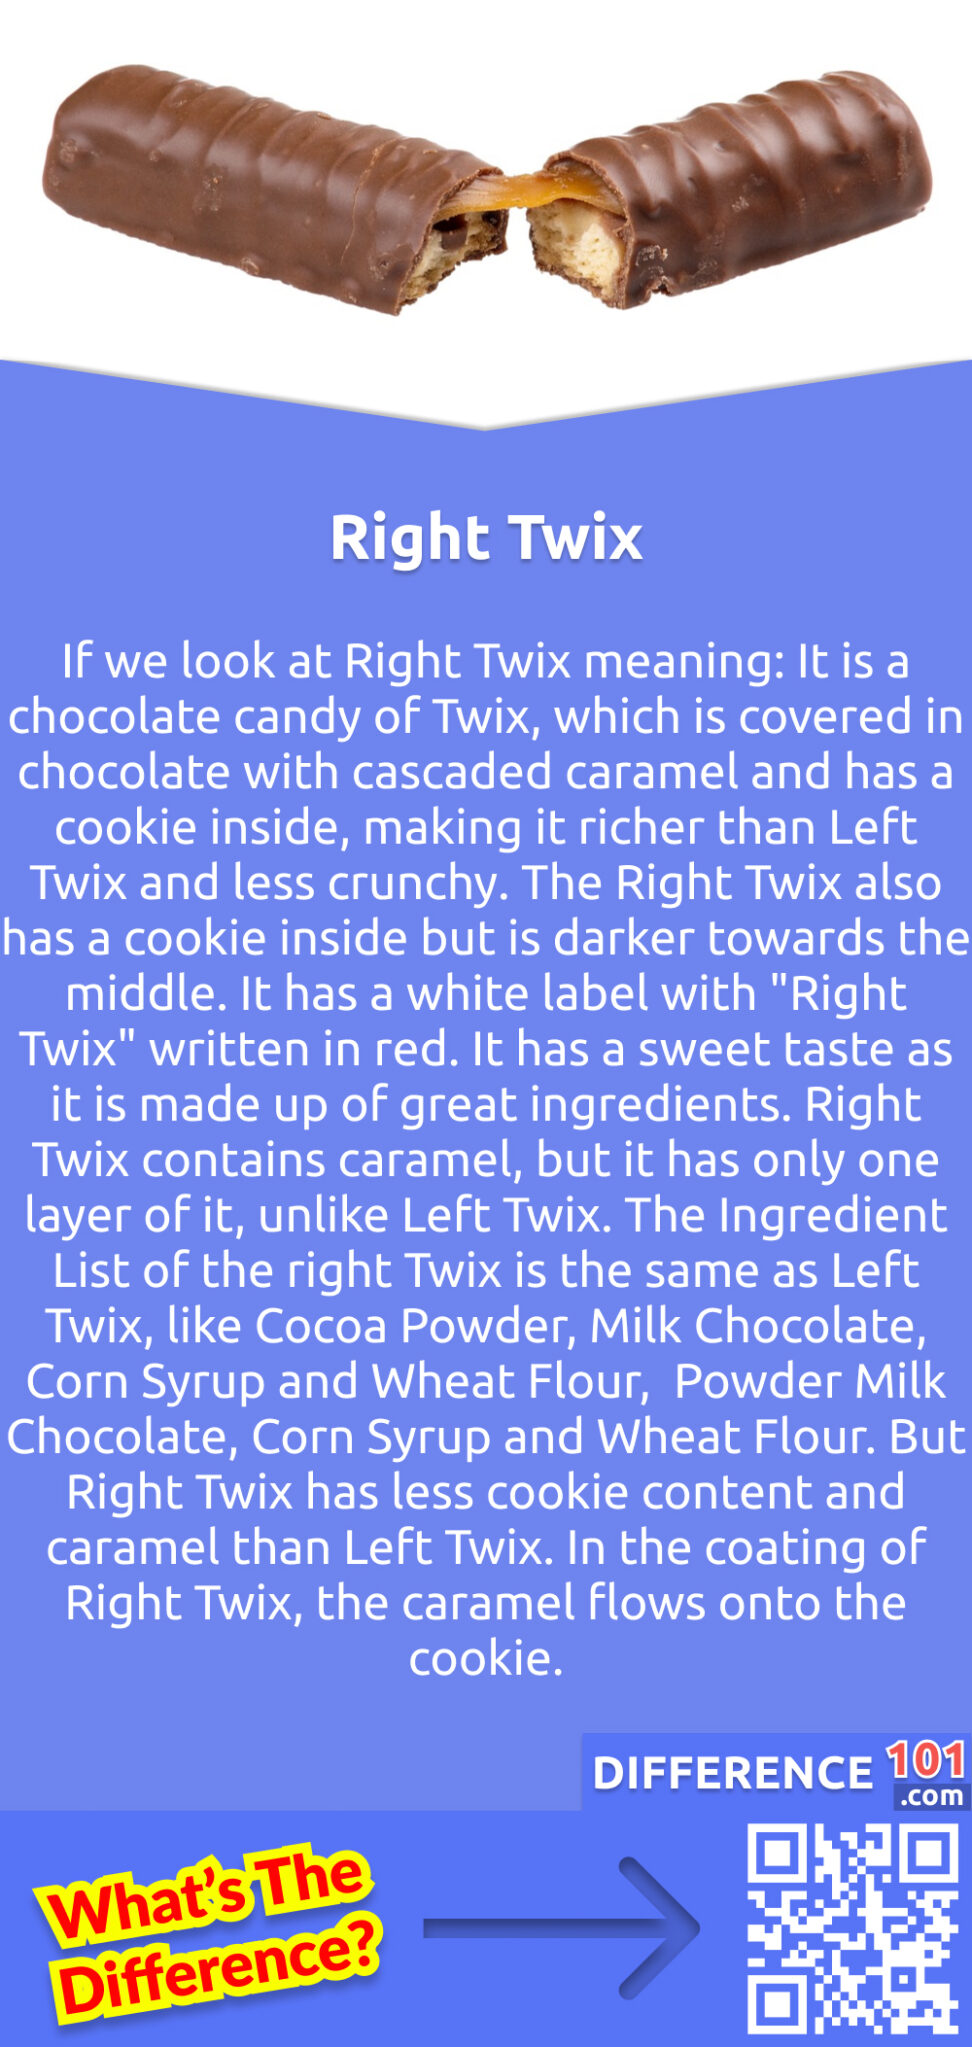 What Is the Right Twix? If we look at Right Twix meaning: It is a chocolate candy of Twix, which is covered in chocolate with cascaded caramel and has a cookie inside, making it richer than Left Twix and less crunchy. The Right Twix also has a cookie inside but is darker towards the middle. It has a white label with "Right Twix" written in red. It has a sweet taste as it is made up of great ingredients. Right Twix contains caramel, but it has only one layer of it, unlike Left Twix. The Ingredient List of the right Twix is the same as Left Twix, like Cocoa Powder, Milk Chocolate, Corn Syrup and Wheat Flour,  Powder Milk Chocolate, Corn Syrup and Wheat Flour. But Right Twix has less cookie content and caramel than Left Twix. In the coating of Right Twix, the caramel flows onto the cookie.
